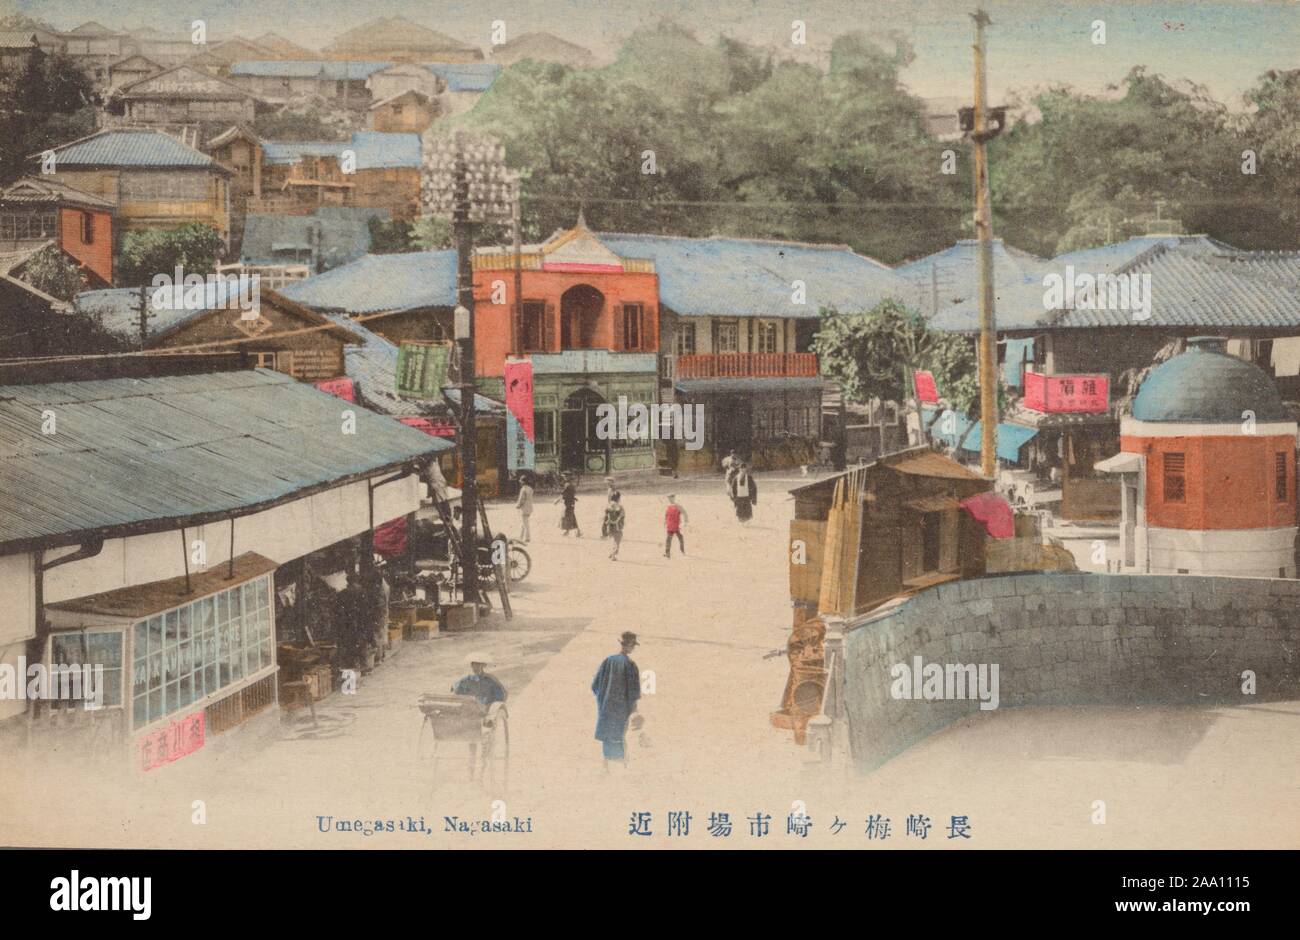 Illustrated postcard of a townscape view of a busy street and buildings in Umegasaki area, Nagasaki, Japan, 1913. From the New York Public Library. () Stock Photo